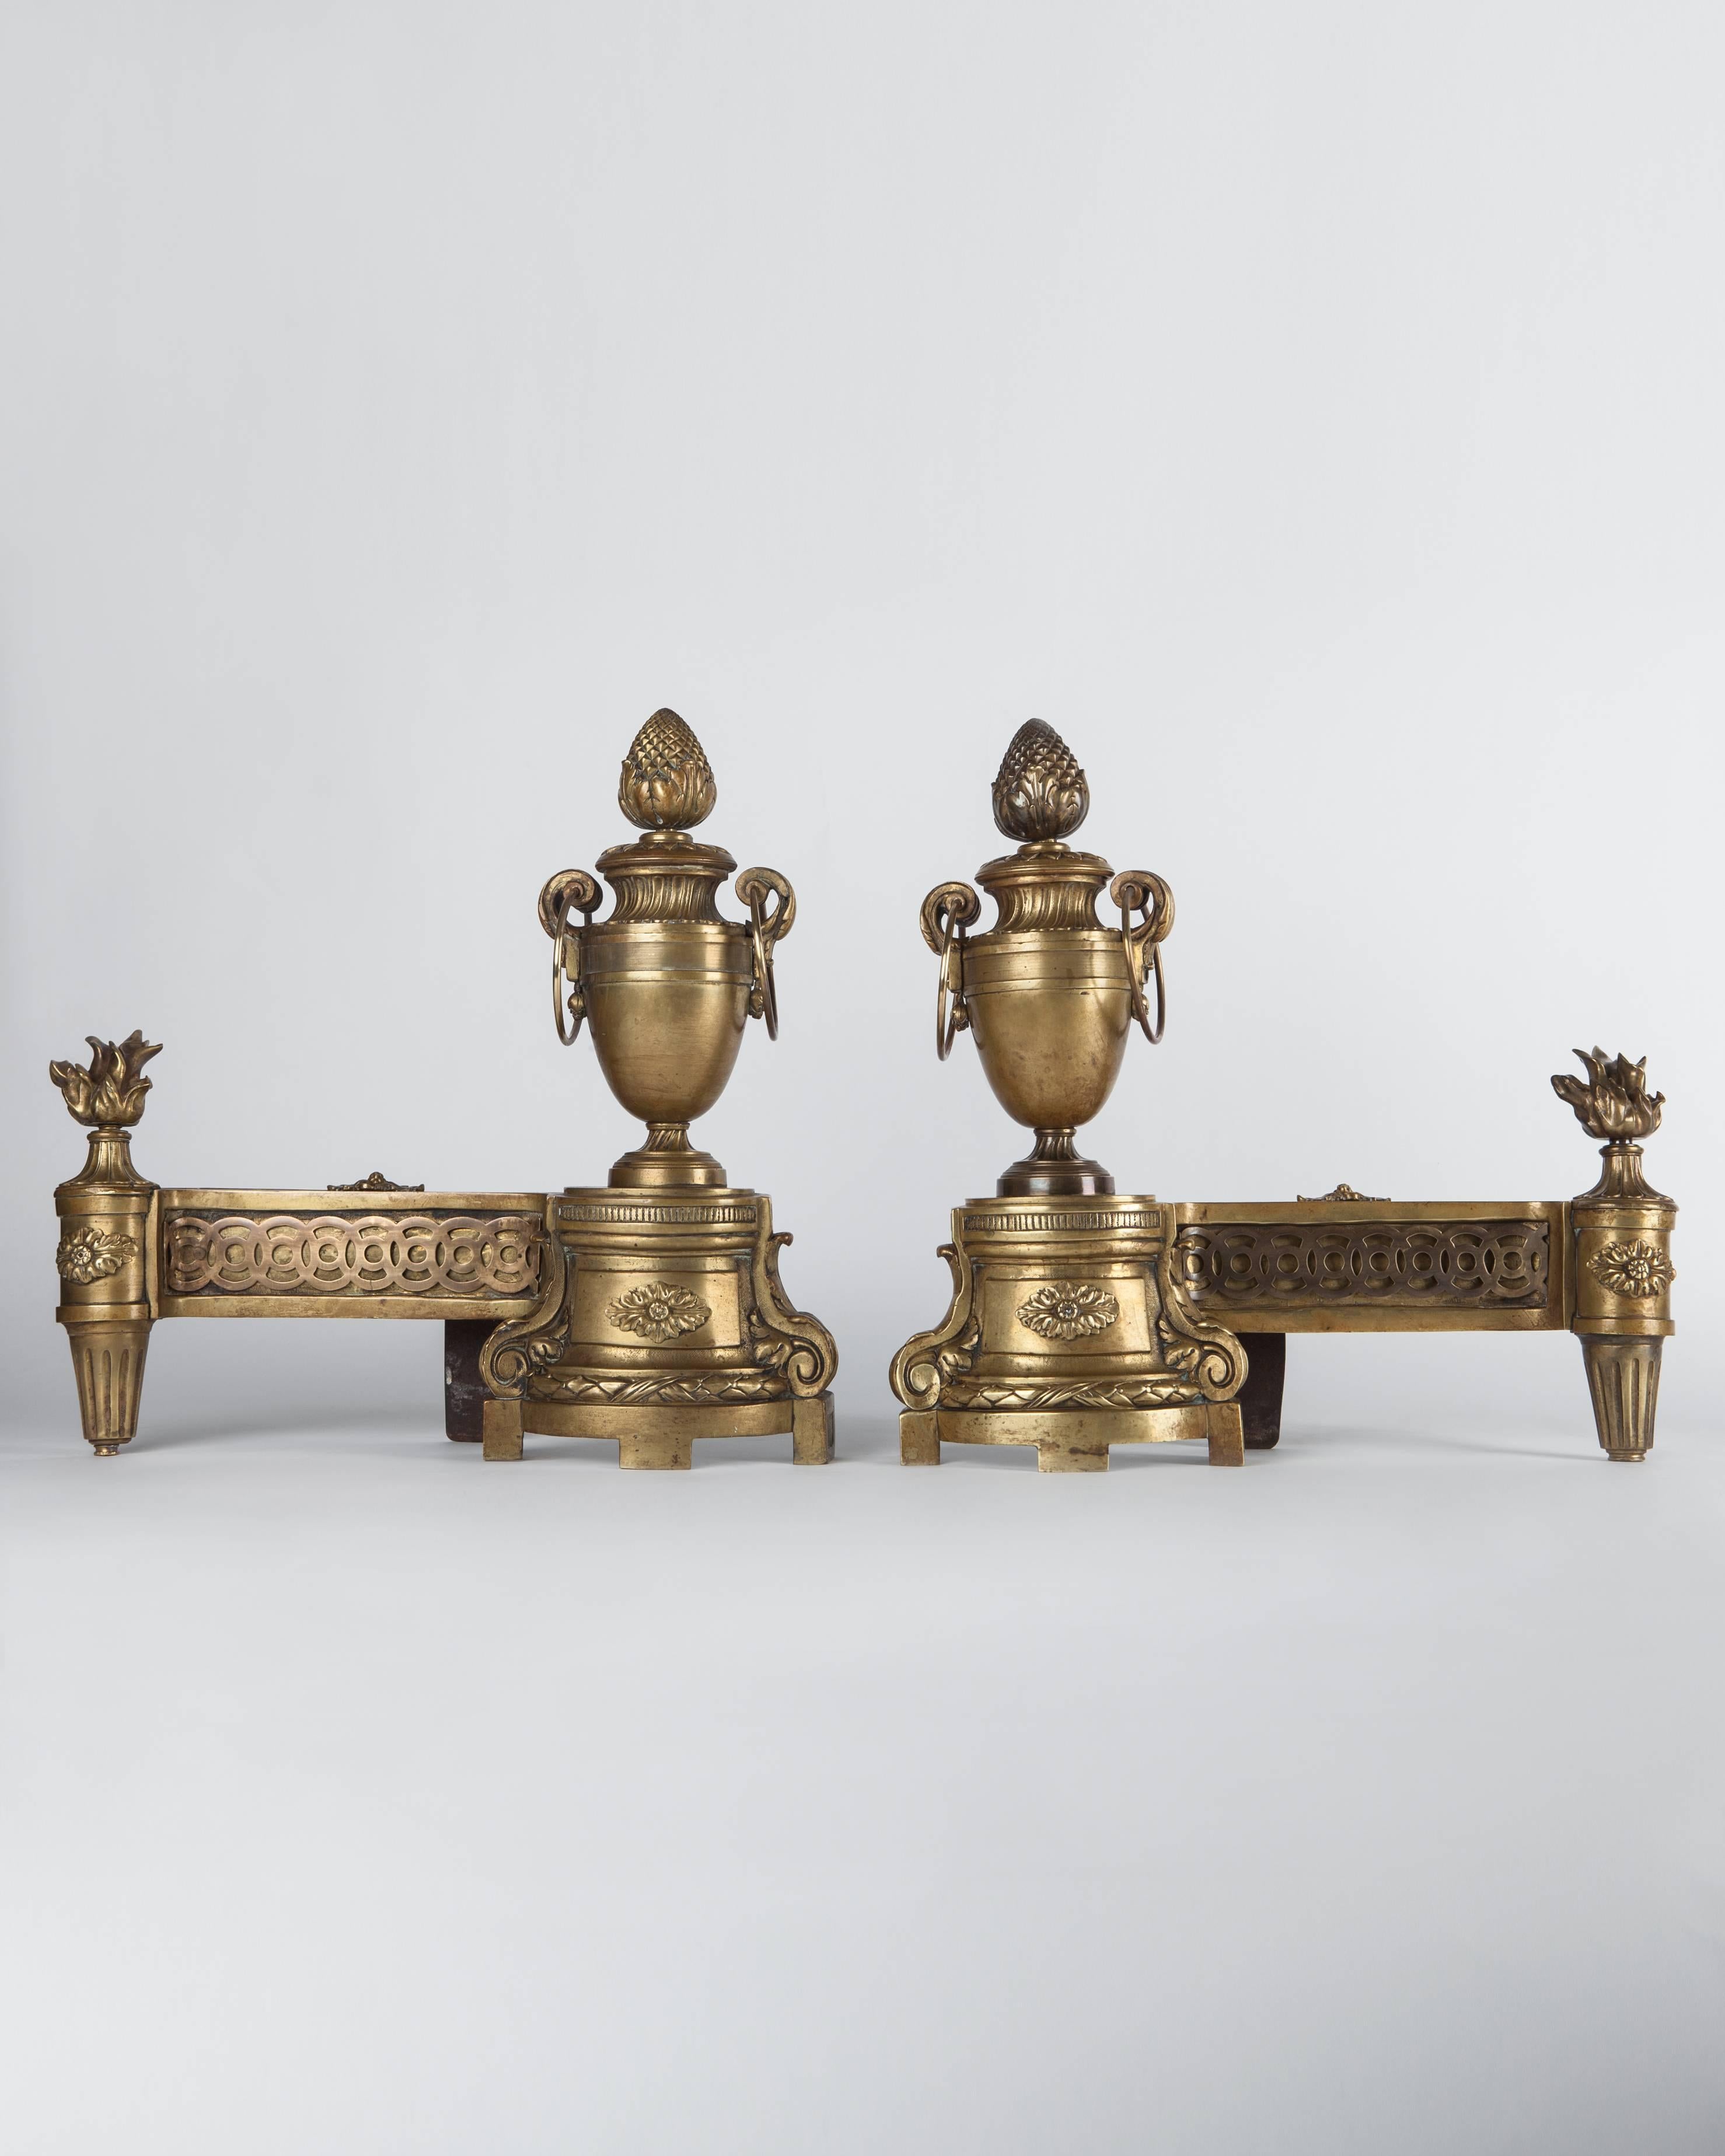 Iron French Urn Form Chenets with Flame and Pinecone Finials in Aged Brass, c. 1860s For Sale